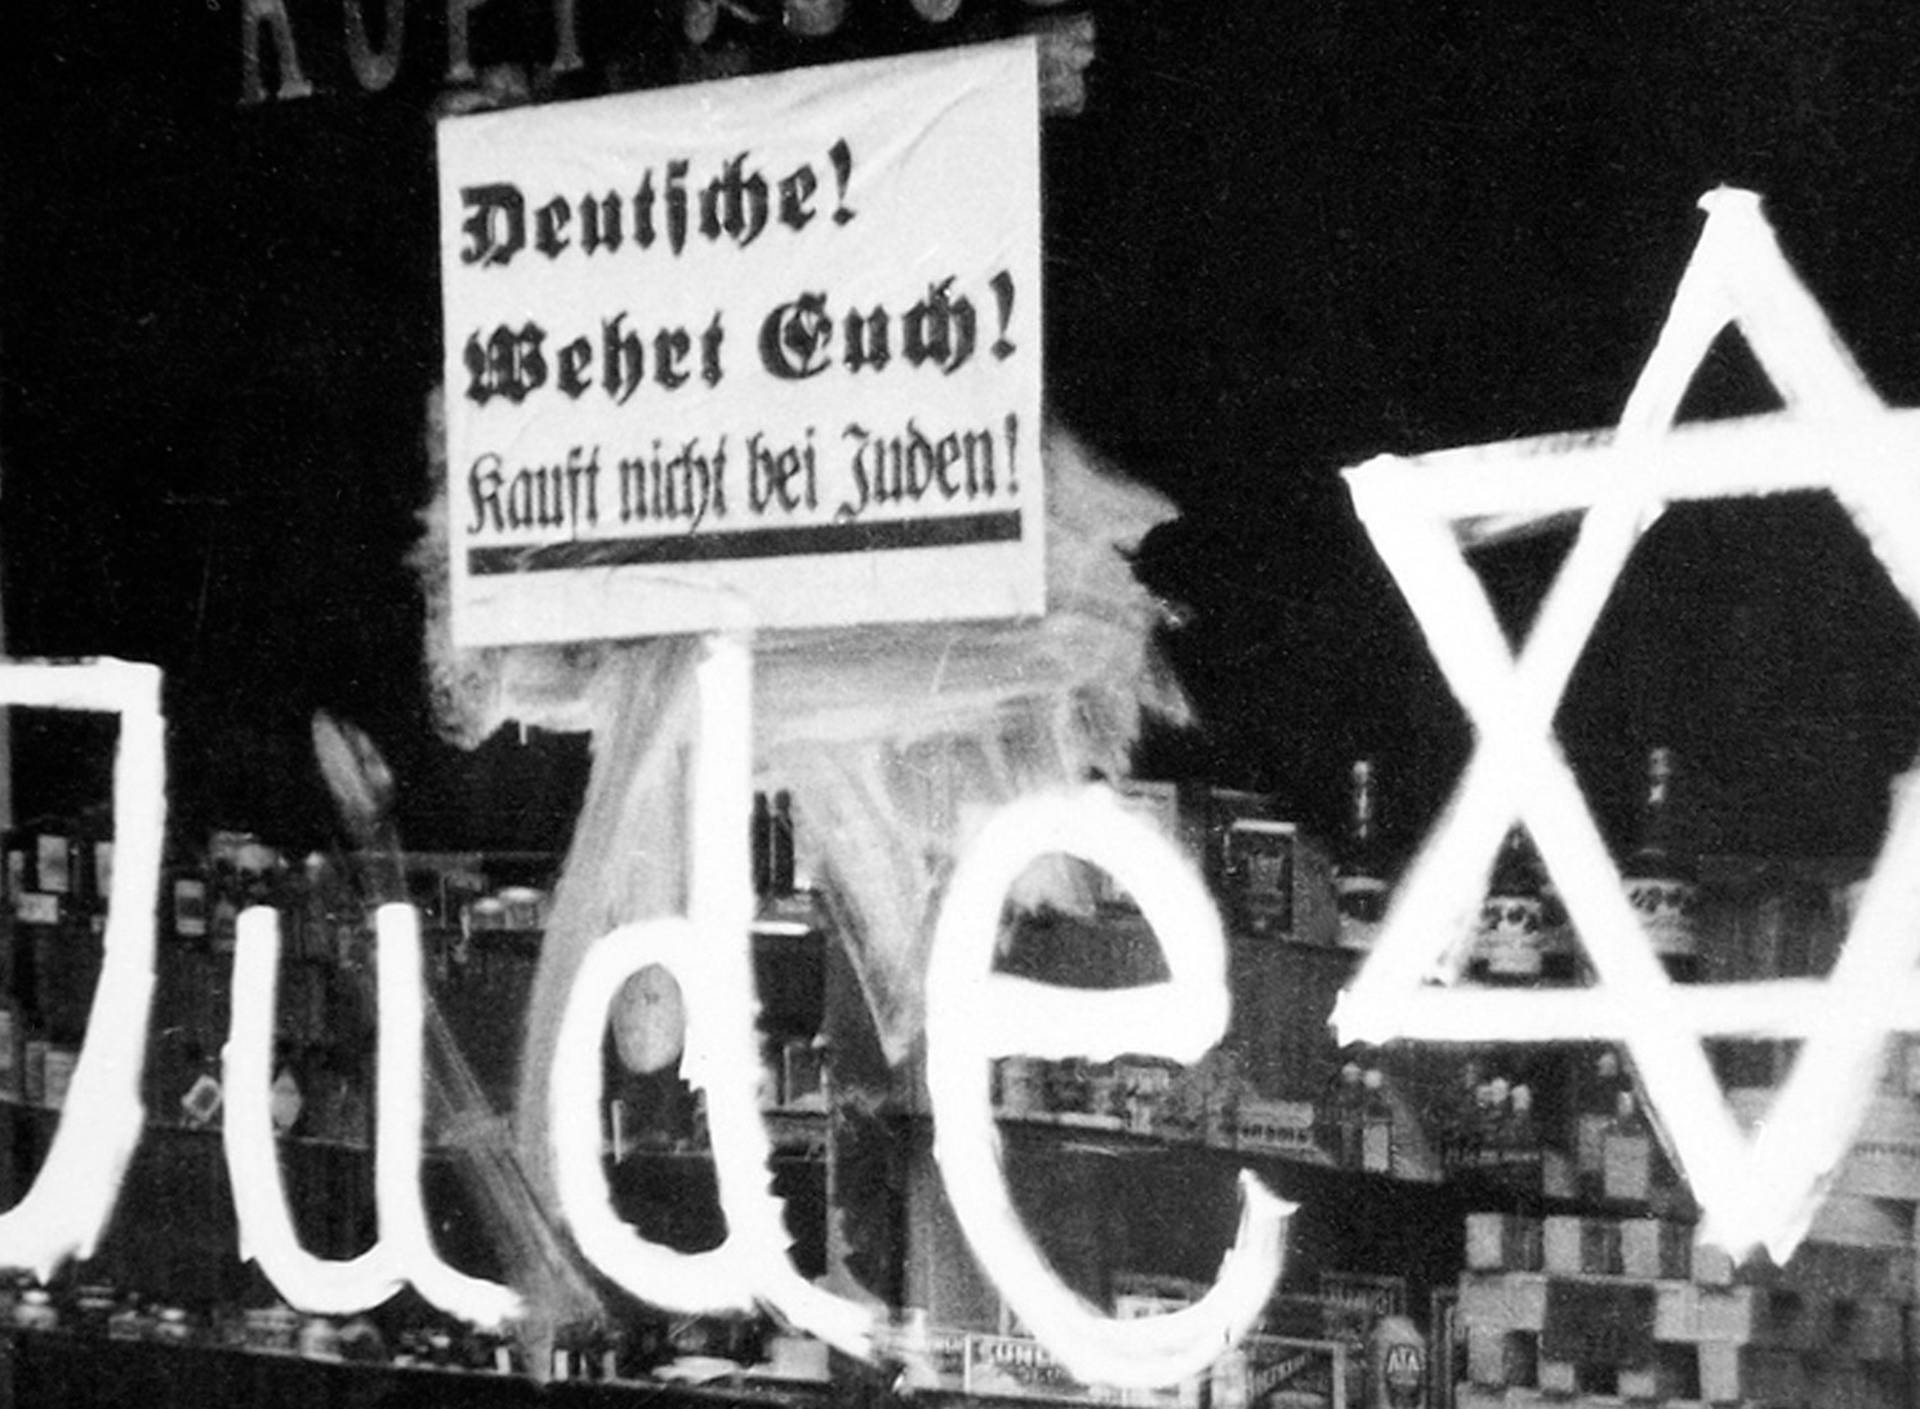 Germany: A Jewish-owned shop vandalized by Nazis with poster reading 'Germans Defend Yourselves - Don't Buy from Jews', 1938